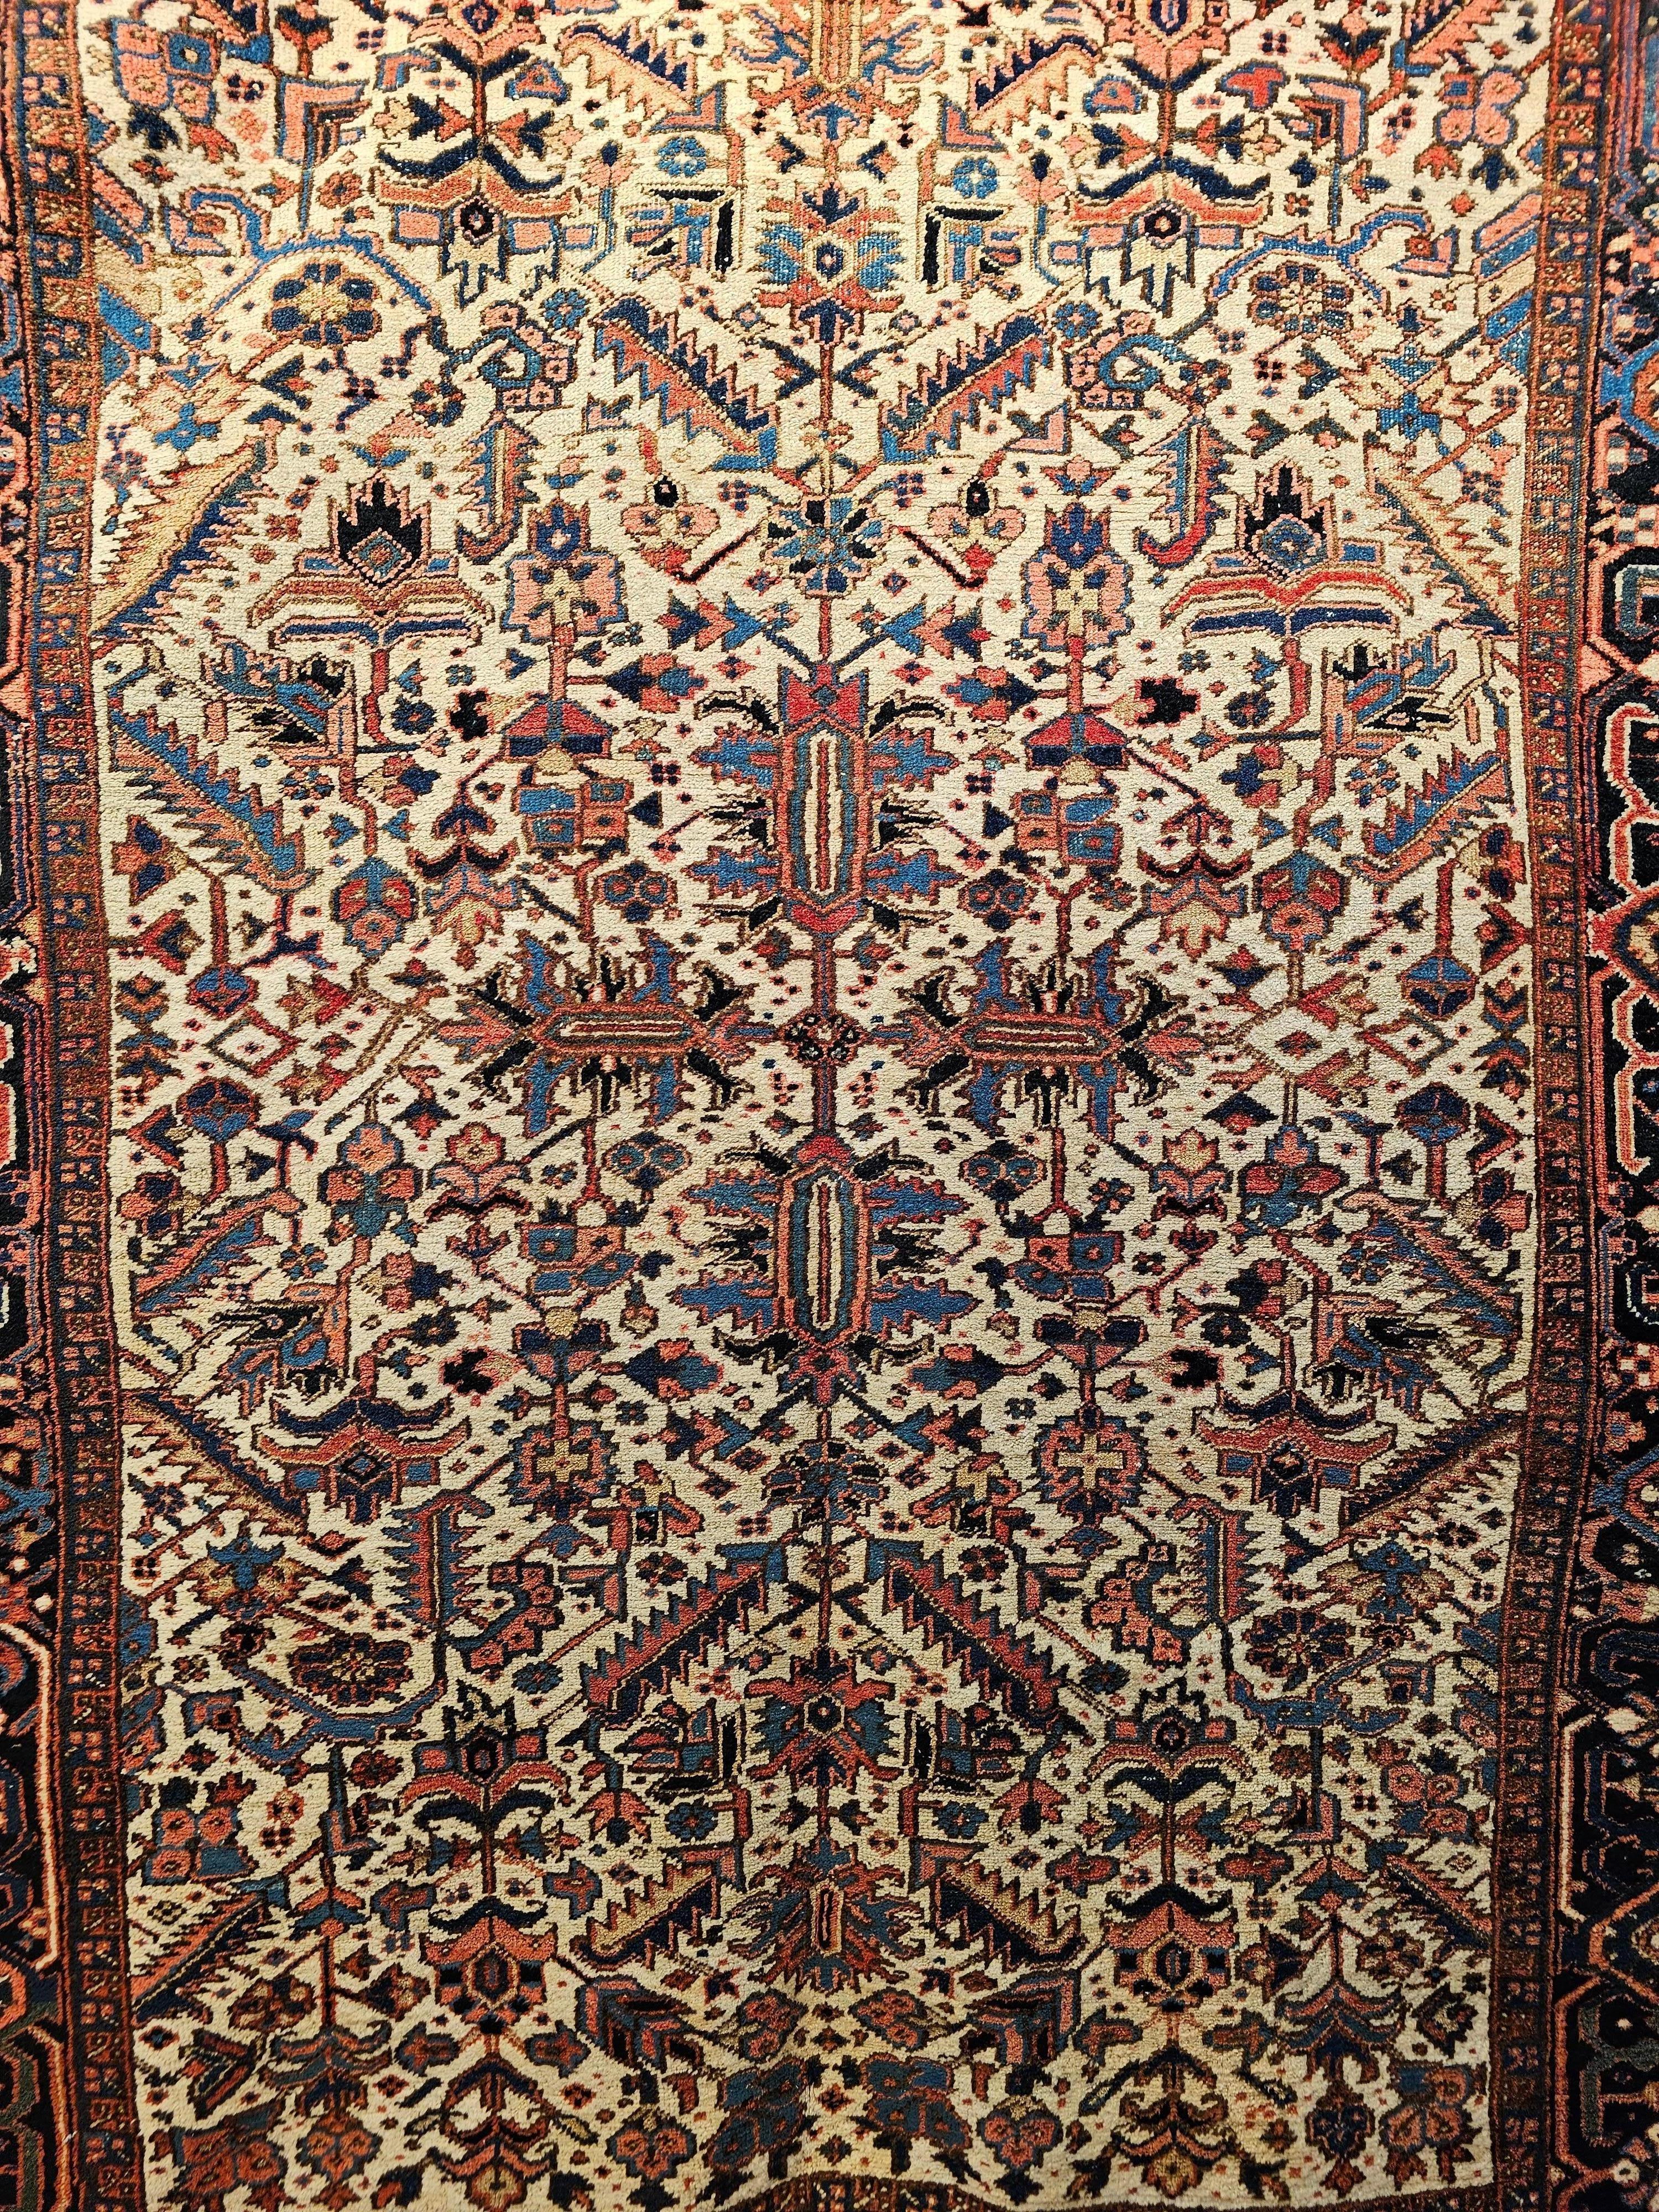 The beautiful Heriz with Serapi colors is in an all over pattern set on an ivory color field. This beautiful Heriz rug was woven in a village in the Azerbaijan district of NW Persia in the first quarter of the 1900s. It has a few very unique and